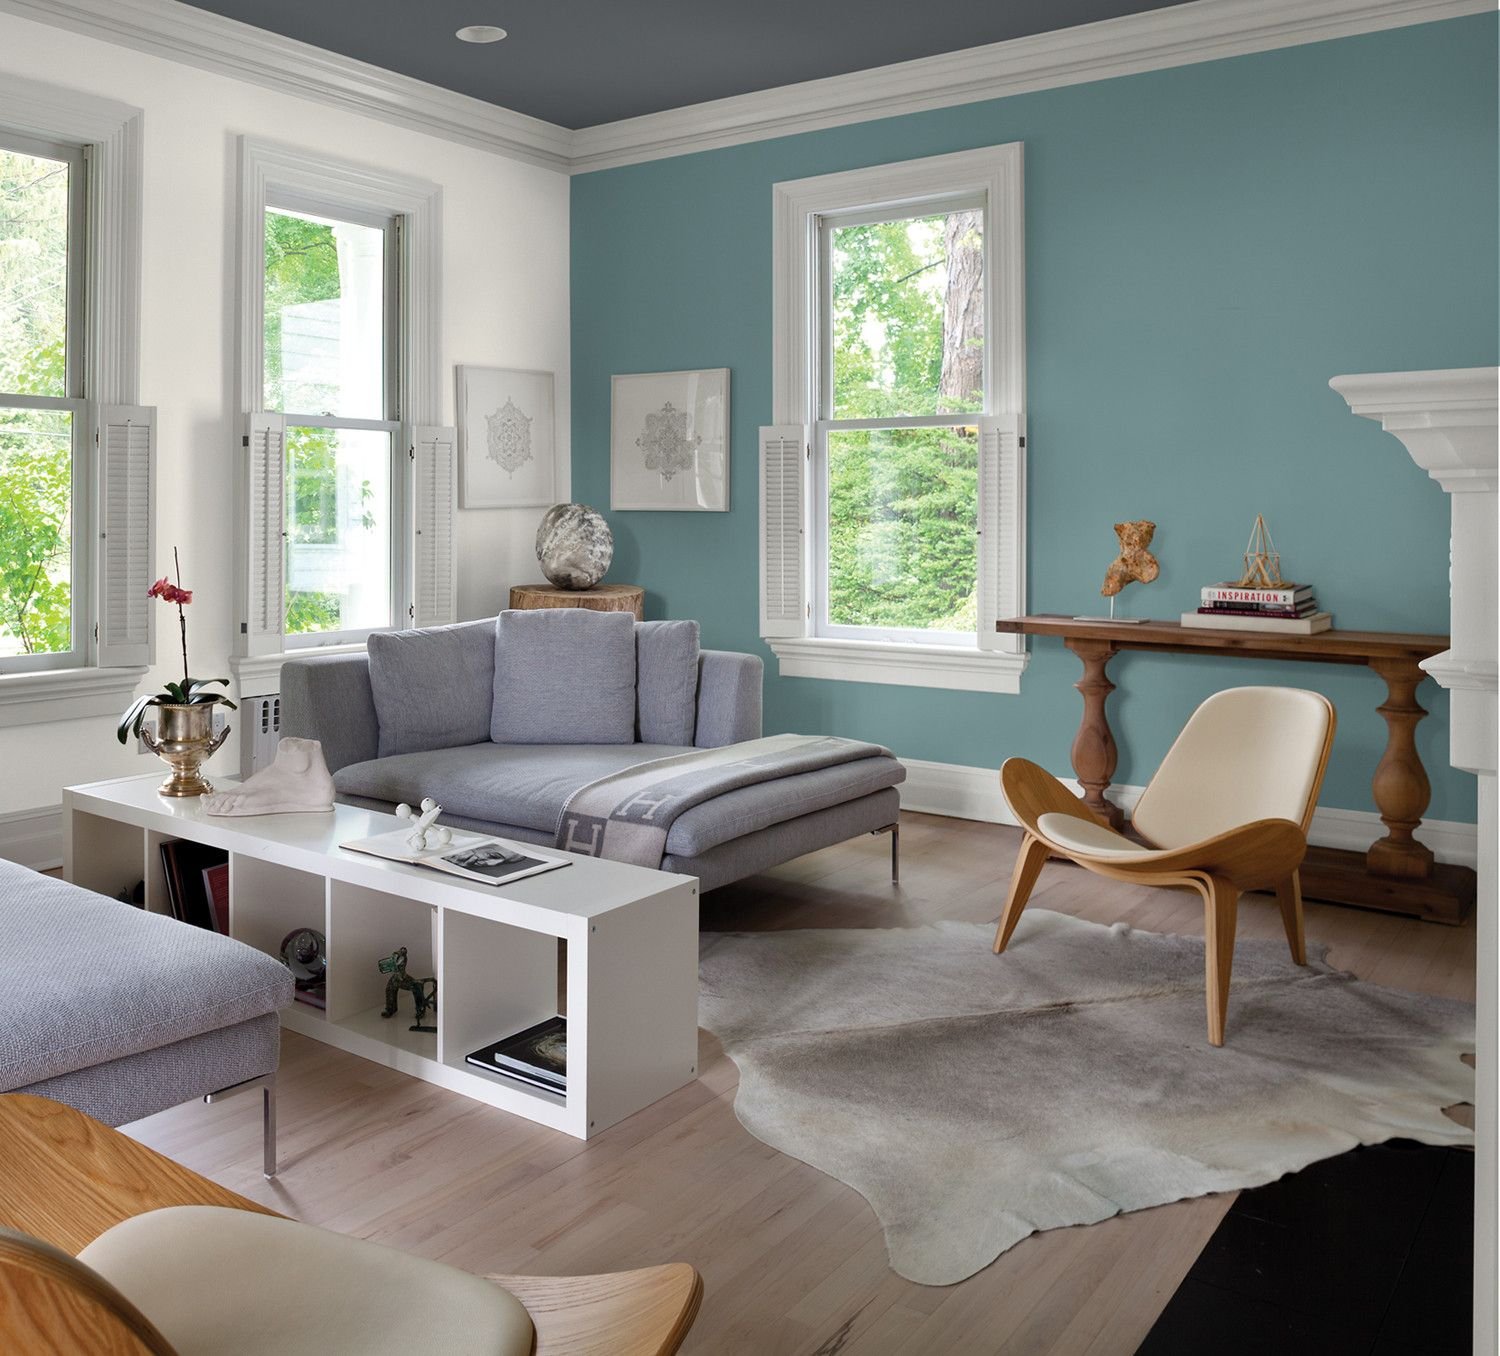 What Are The Most Modern Living Room Paint Colors? Home Decoration & More